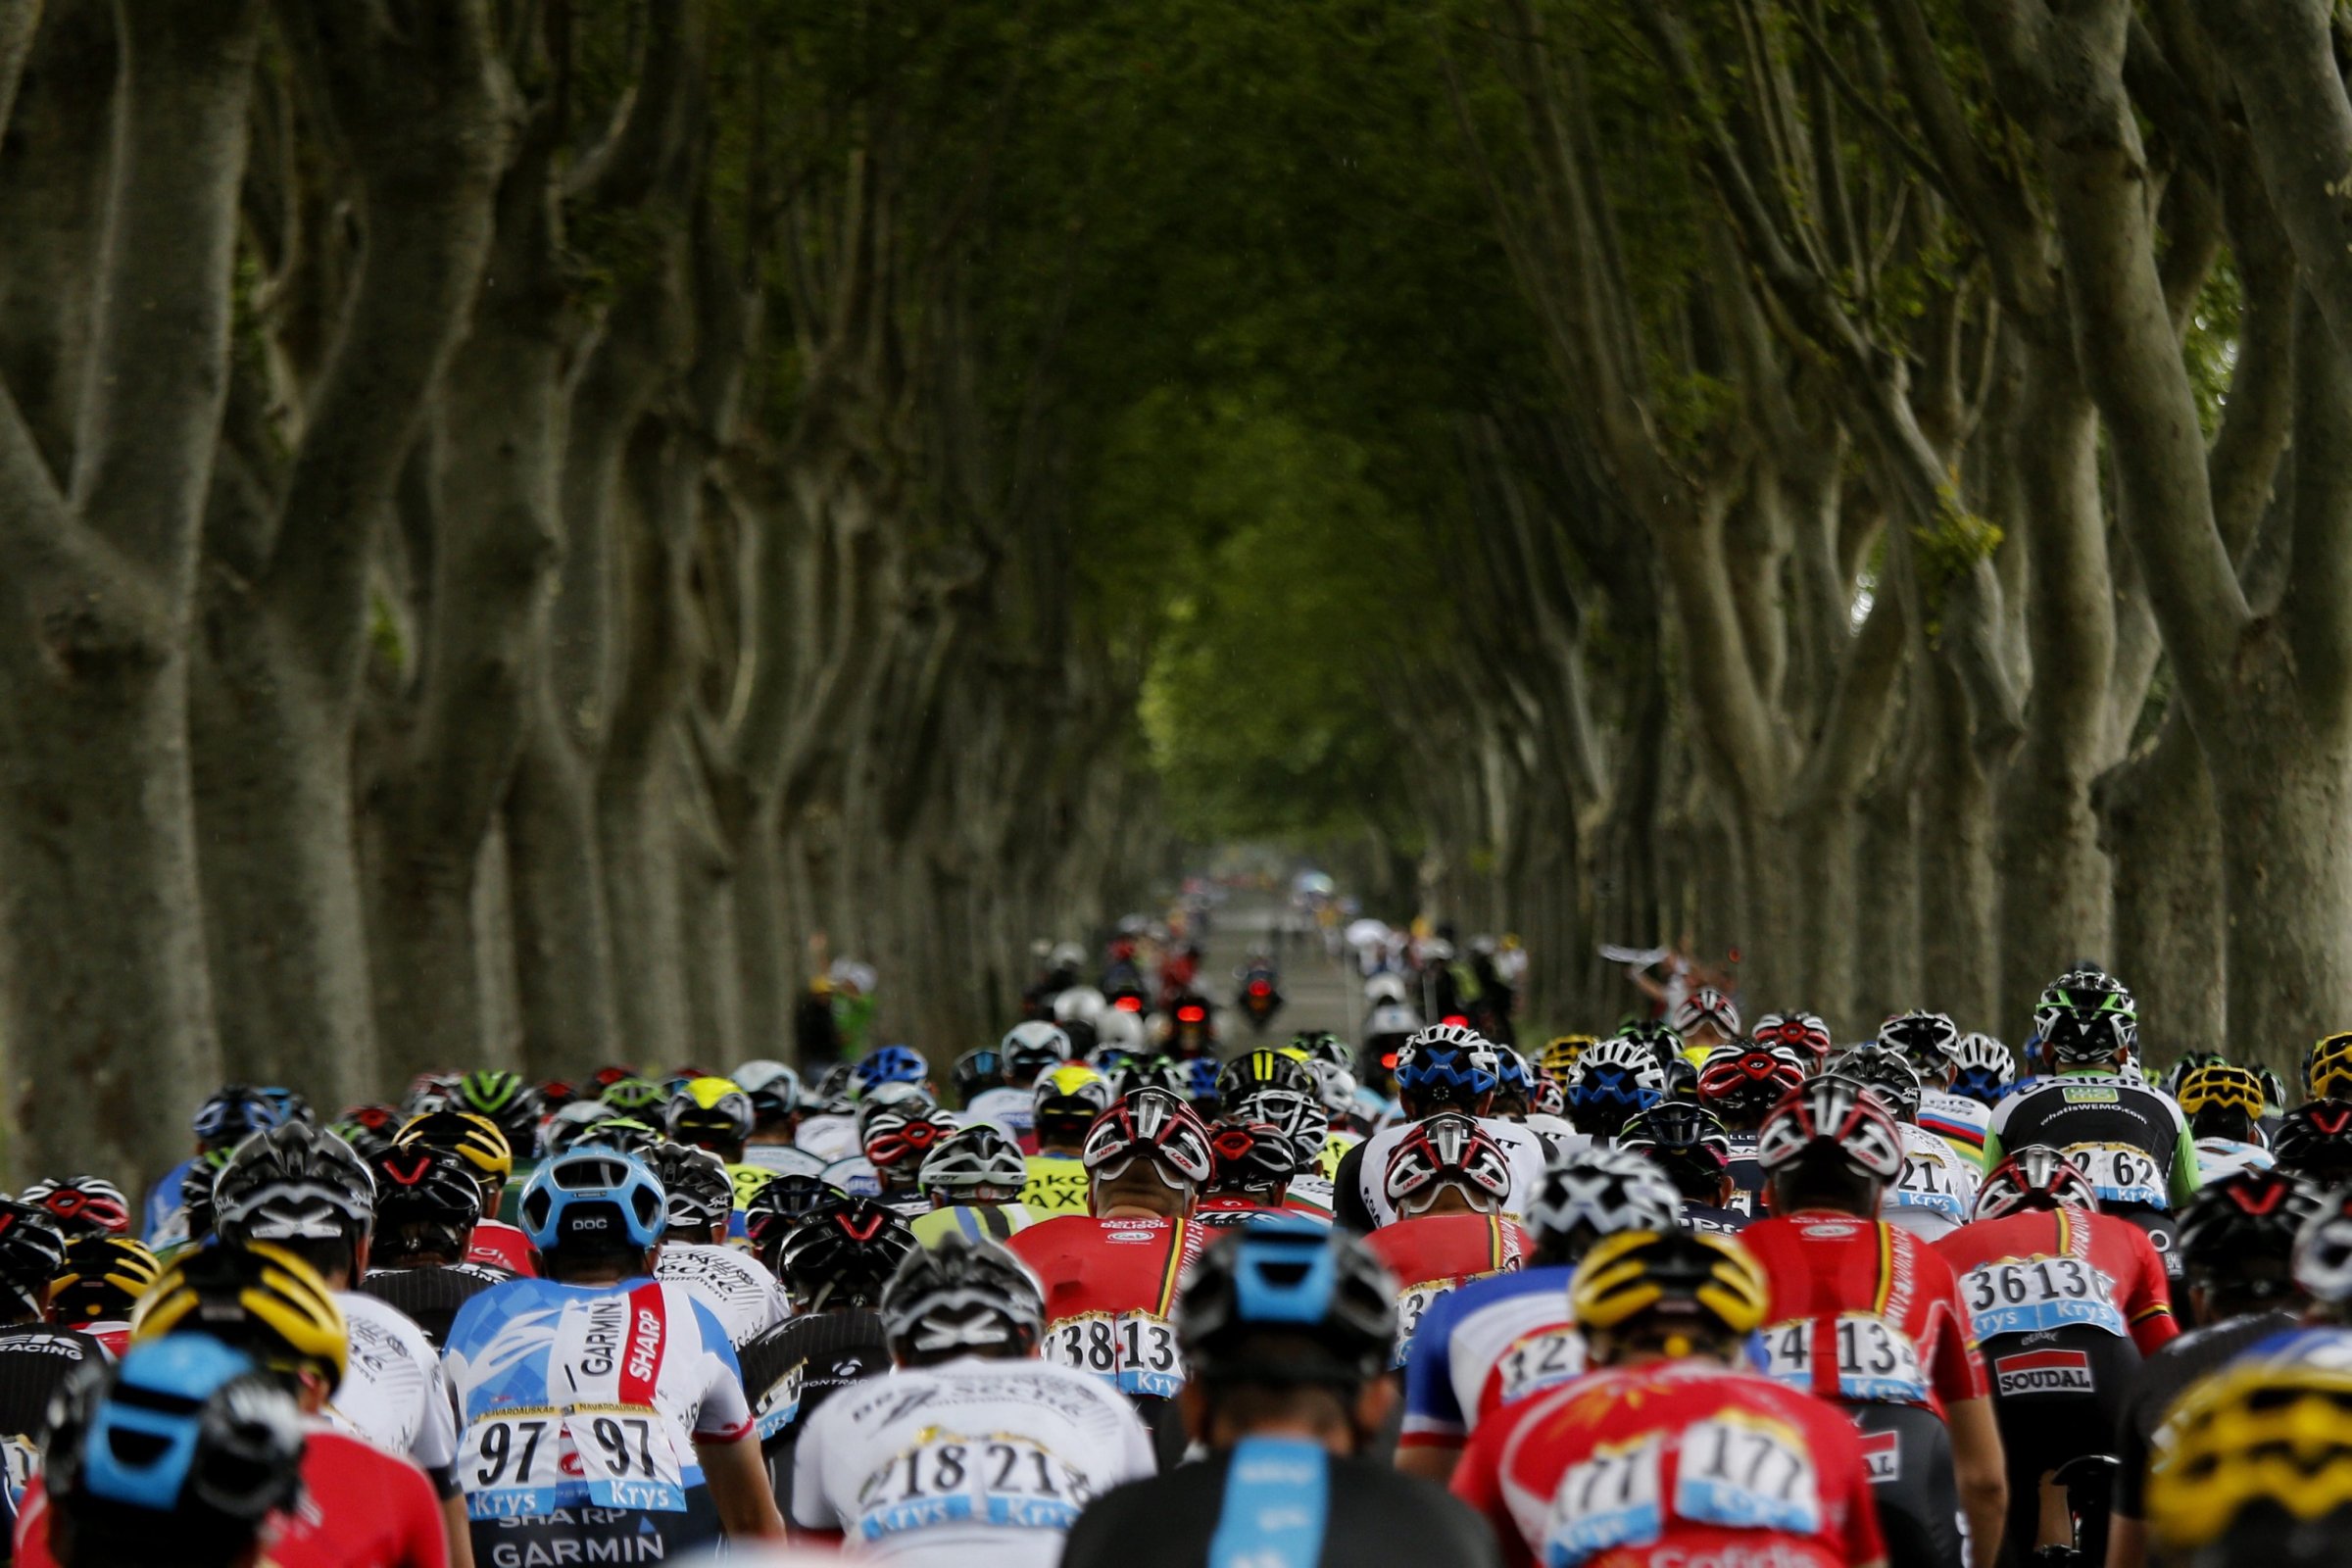 The pack of riders is on the way during the 15th stage of the 101st Tour de France cycling race, over 222 km from Tallard to Nimes, in France, on July, 20 2014.